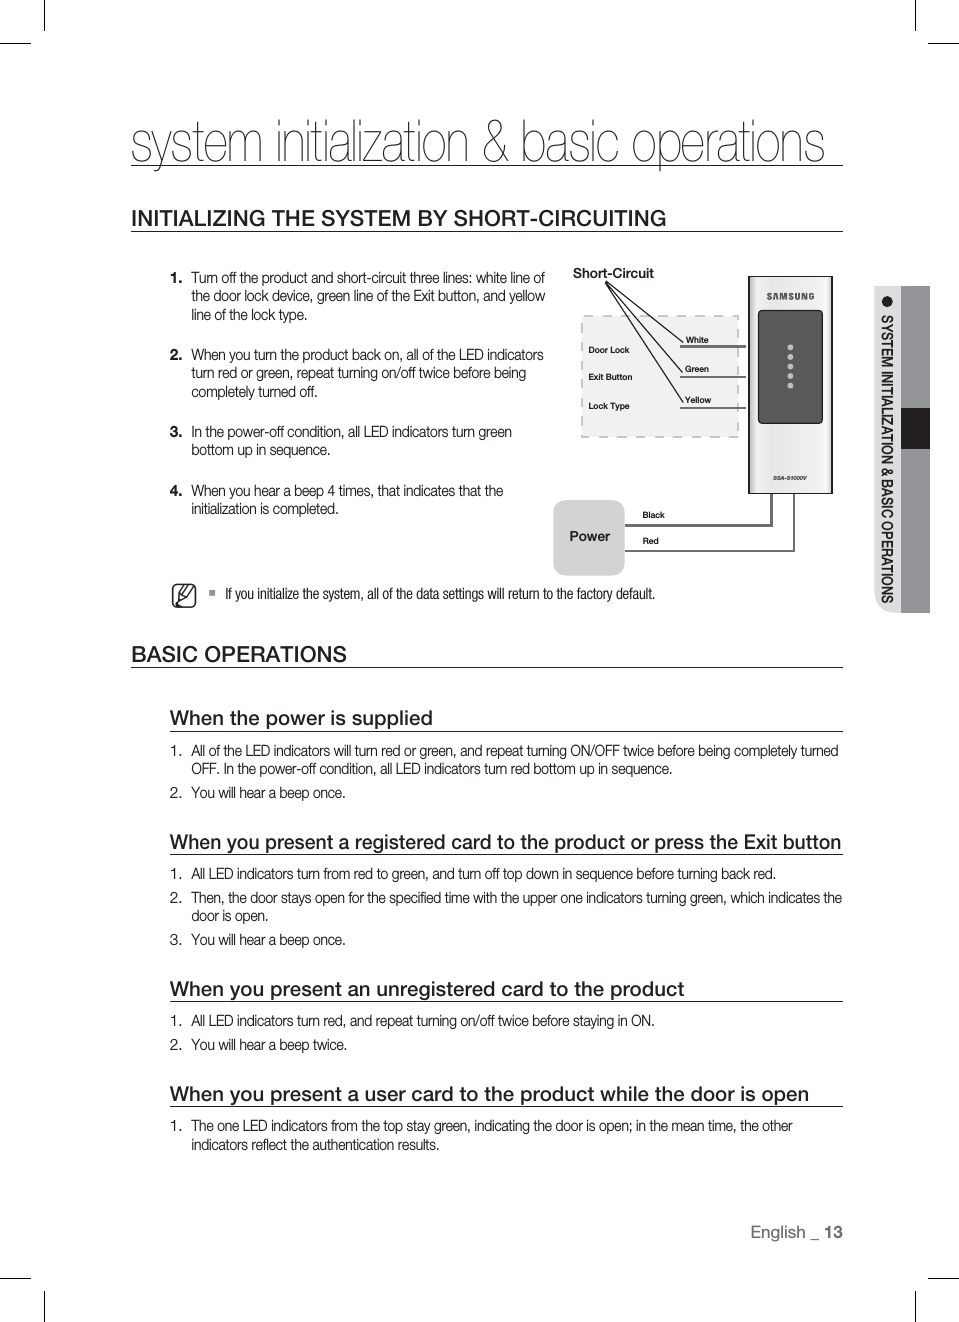 English English _ 13SYSTEM INITIALIZATION &amp; BASIC OPERATIONSsystem initialization &amp; basic operations INITIALIZING THE SYSTEM BY SHORT-CIRCUITINGTurn off the product and short-circuit three lines: white line of the door lock device, green line of the Exit button, and yellow line of the lock type.When you turn the product back on, all of the LED indicators turn red or green, repeat turning on/off twice before being completely turned off.In the power-off condition, all LED indicators turn green bottom up in sequence.When you hear a beep 4 times, that indicates that the initialization is completed.If you initialize the system, all of the data settings will return to the factory default.BASIC OPERATIONSWhen the power is suppliedAll of the LED indicators will turn red or green, and repeat turning ON/OFF twice before being completely turned OFF. In the power-off condition, all LED indicators turn red bottom up in sequence.You will hear a beep once.When you present a registered card to the product or press the Exit buttonAll LED indicators turn from red to green, and turn off top down in sequence before turning back red.Then, the door stays open for the speciﬁ ed time with the upper one indicators turning green, which indicates the door is open.You will hear a beep once.When you present an unregistered card to the productAll LED indicators turn red, and repeat turning on/off twice before staying in ON.You will hear a beep twice.When you present a user card to the product while the door is openThe one LED indicators from the top stay green, indicating the door is open; in the mean time, the other indicators reﬂ ect the authentication results.1.2.3.4.M1.2.1.2.3.1.2.1.SSA-S1000VExit Button GreenYellowLock TypeDoor LockWhiteShort-CircuitPowerBlackRed